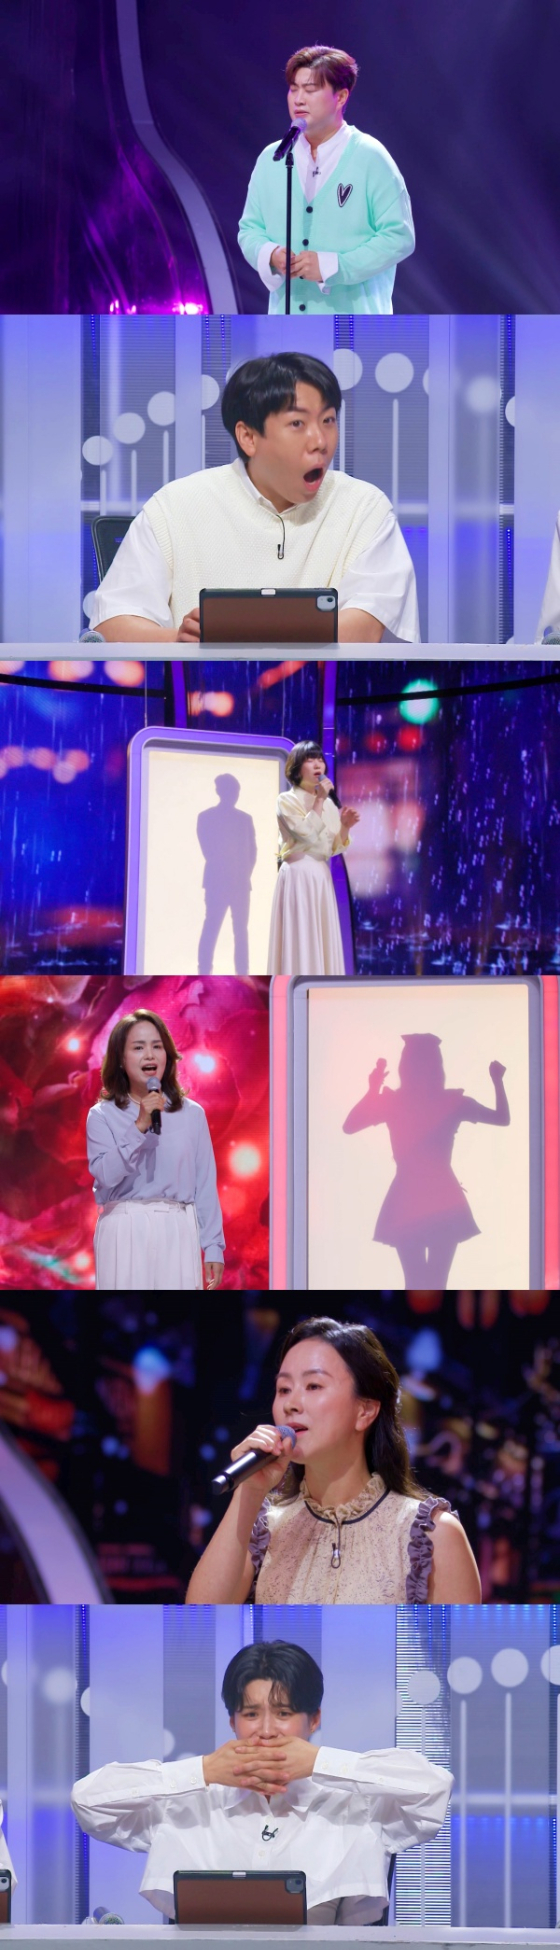 In the SBS music mystery show DNA Singer - Fantastic Duo Family (hereinafter referred to as Fantastic Duo Family) to be broadcast on the 4th, super-class stars who surprised everyone from the appearance will be released.The star who appeared for the first time on the day introduced himself as the national son-in-law and said, I often hear that I want to make my son-in-law to my sisters,When the judges asked, What charm did you capture your sisters hearts? It is not bad, but it seems to be because of my voice and song.In addition, I asked the star how far it was her sisters standard, and the star said, All under 100 years old are sisters.Since then, the stage of the DNA singer has also been revealed as a talented person who owns the singing ability of the past as well as the star, and MC Yang Se-chan said, Best of the Family so far!He praised the star familys identity.Finally, the Identity of the star everyone was curious about was revealed, and MC Yang Se-chan was surprised to say, Why are you out here!The next star introduced me as a star who was born, and said, I took more than 10 commercials thanks to the job.In particular, BTS, Twice, Exo, Kang Ho-dong and other top stars have become more famous after following my work, raising expectations for star Identity.The DNA singer, who appeared afterwards, also made all the judges creep with the sophisticated stage manners and the high sound that overwhelmed the scene in the solo stage, further amplifying their curiosity about their identity.In addition, after the release of Amo, another special stage of singer Kim Ho-joong, who released the new song The Lighting Man for the first time in the last broadcast, the identity of the mini-homepage star will be released.The stage of the past and their identity, which overwhelmed the scene with the song DNA as well as the star, can be found in the Fantastic Duo Family.